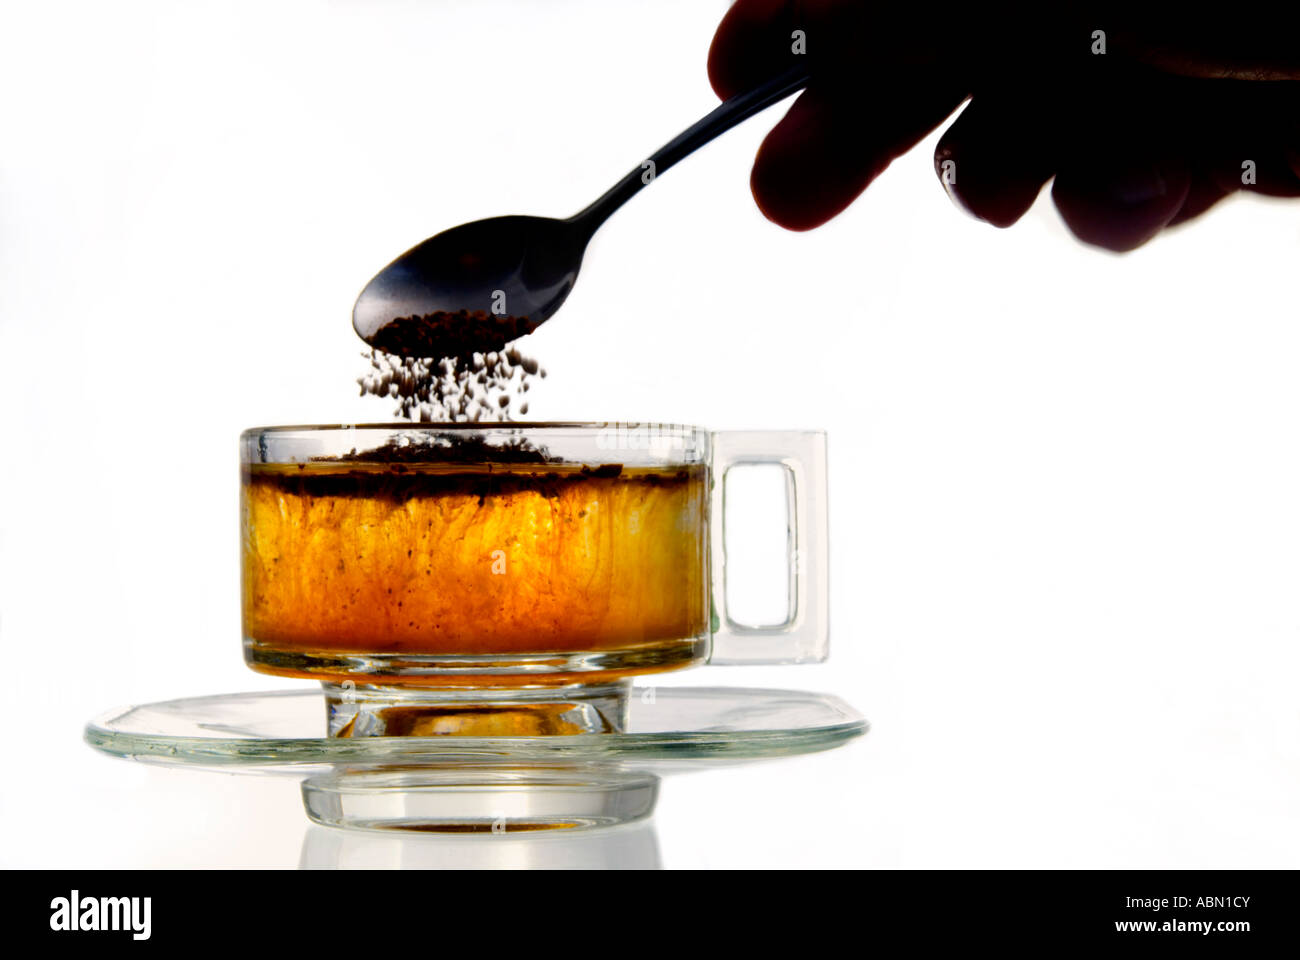 Instant coffee added to water in a glass cup Stock Photo